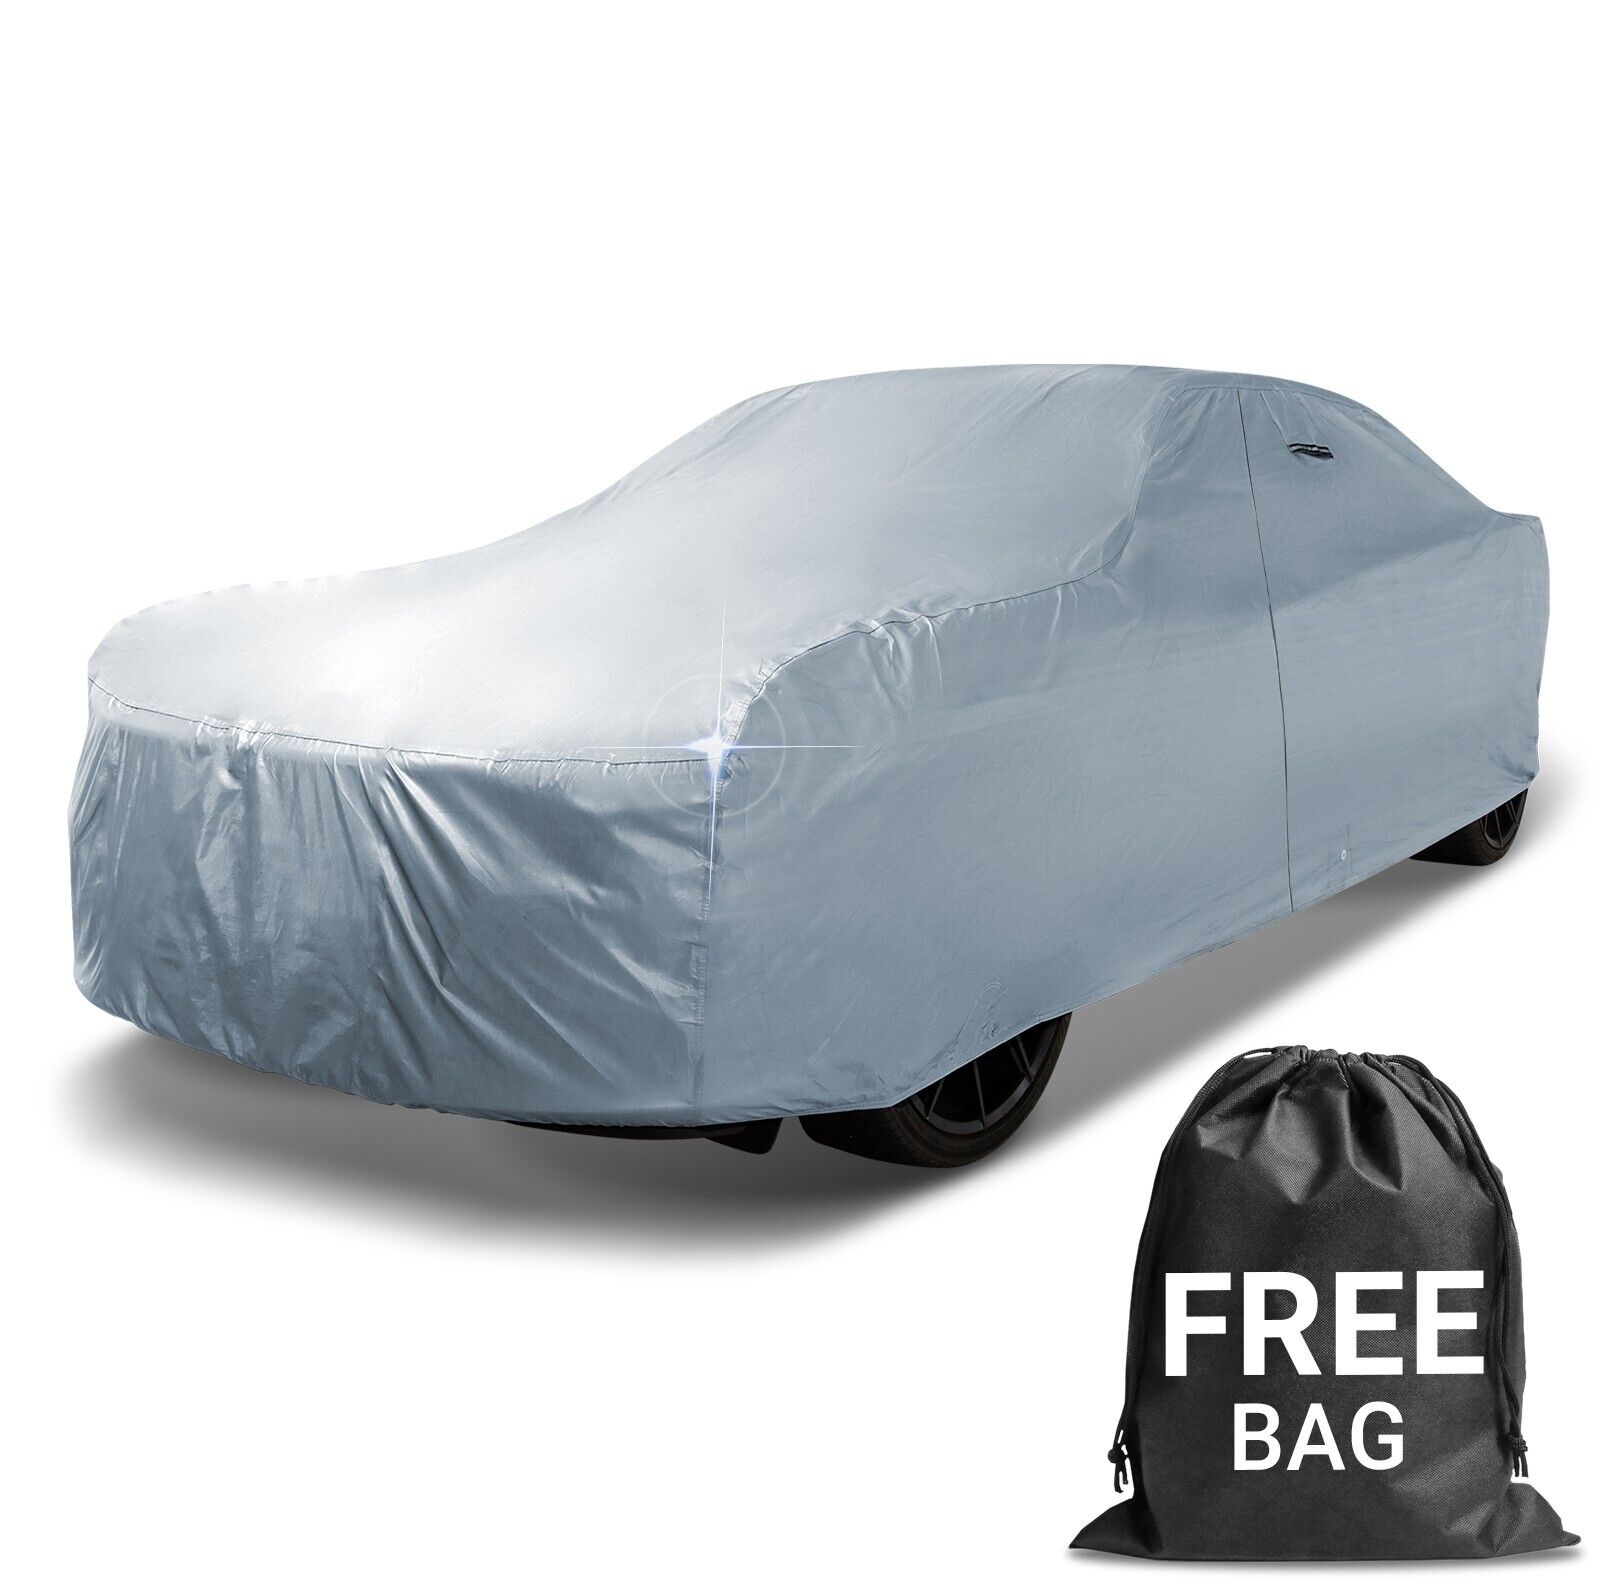 1973-1977 AMC Hornet Sportabout Custom Car Cover - Waterproof Outdoor Protection